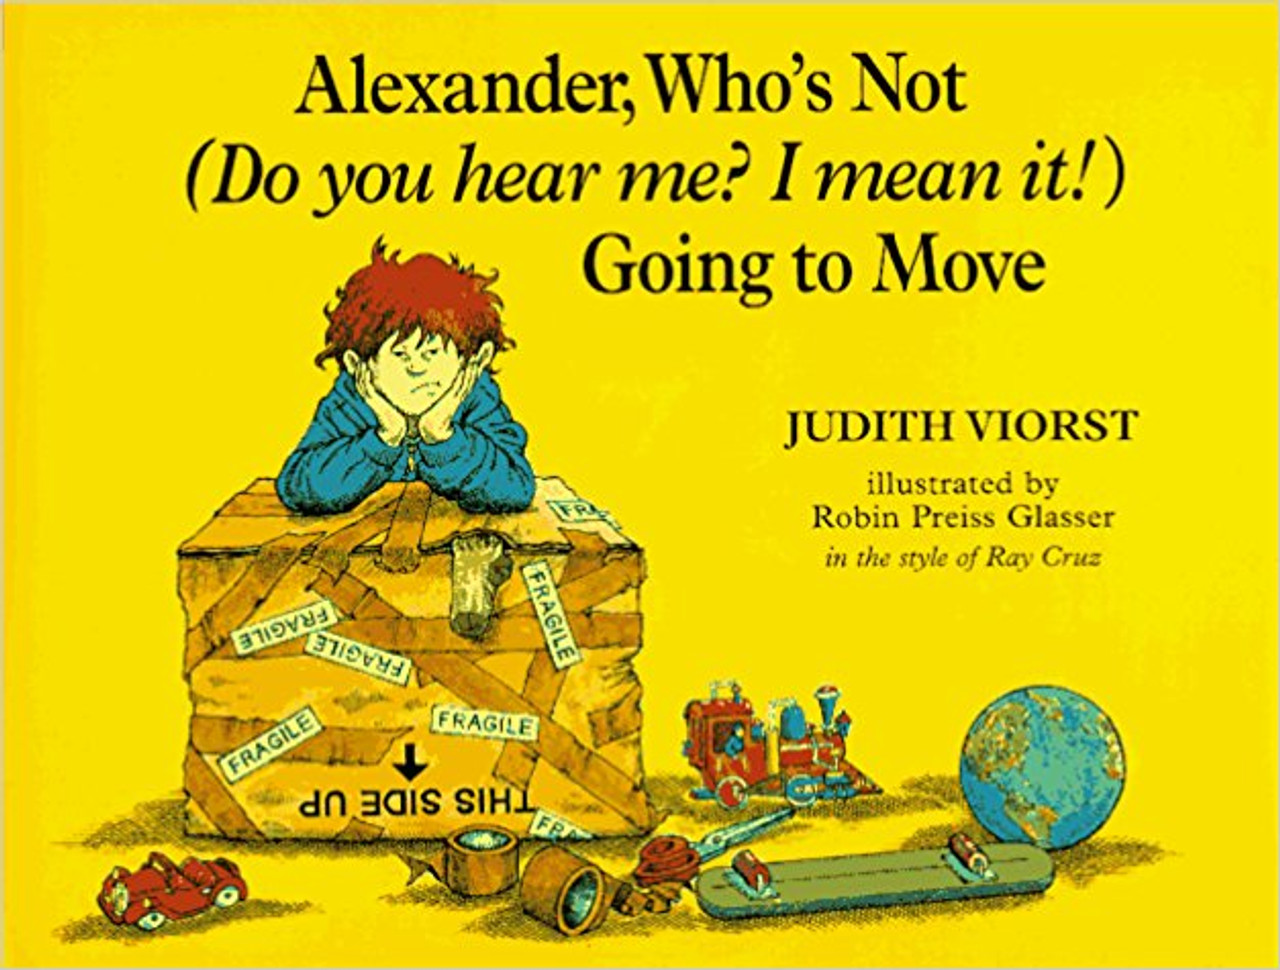 Alexander is not going to leave his best friend Paul. Or Rachel, the best babysitter in the world. Or the Baldwins, who have a terrific dog named Swoozie. Or Mr. and Mrs. Oberdorfer, who always give great treats on Halloween. Who cares if his father has a new job a thousand miles away? Alexander is not -- Do you hear him? He Means it! -- going to move.